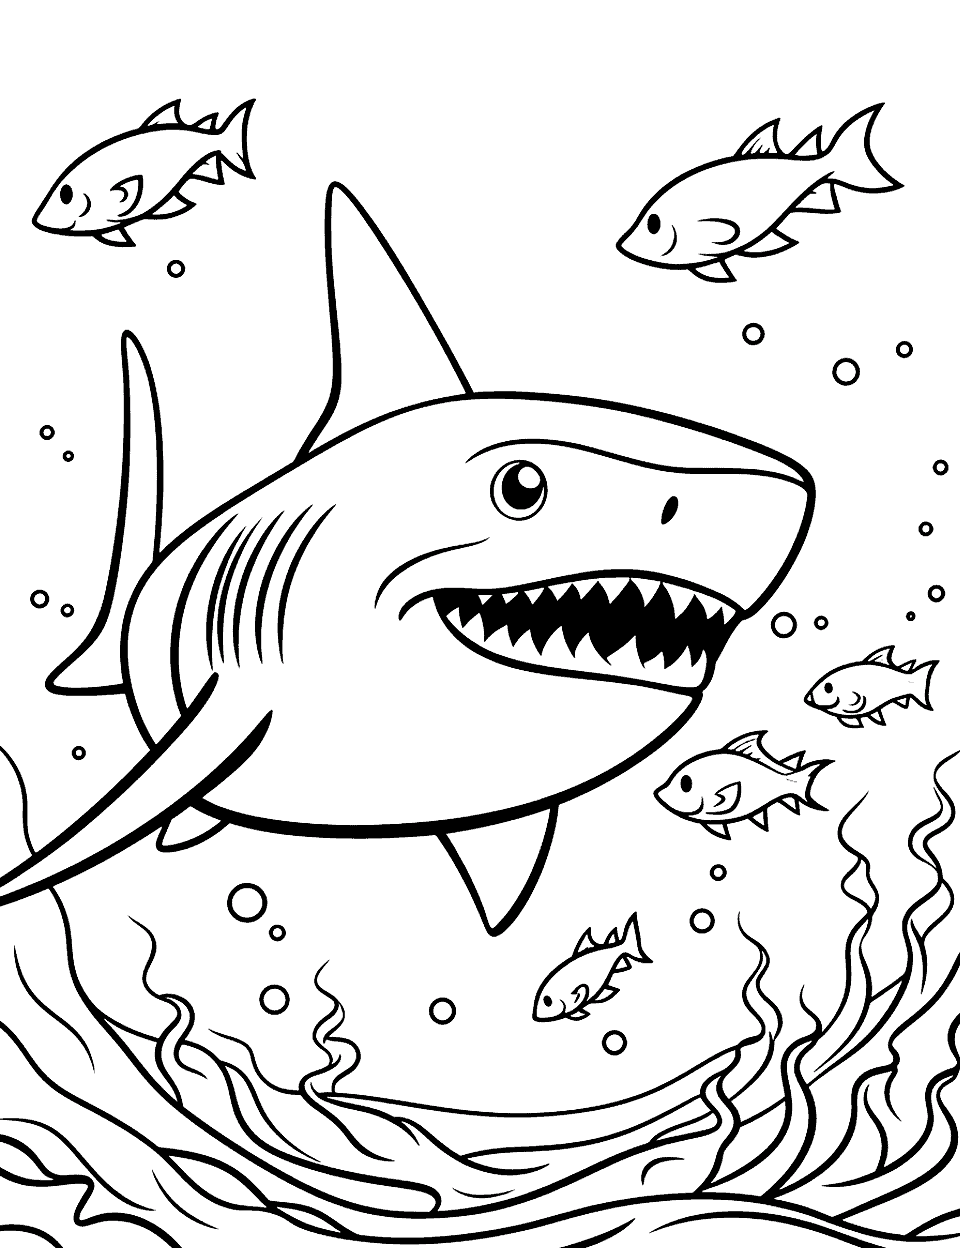 Tiger Shark's Underwater Chase Shark Coloring Page - A thrilling scene of a tiger shark chasing a school of fish.